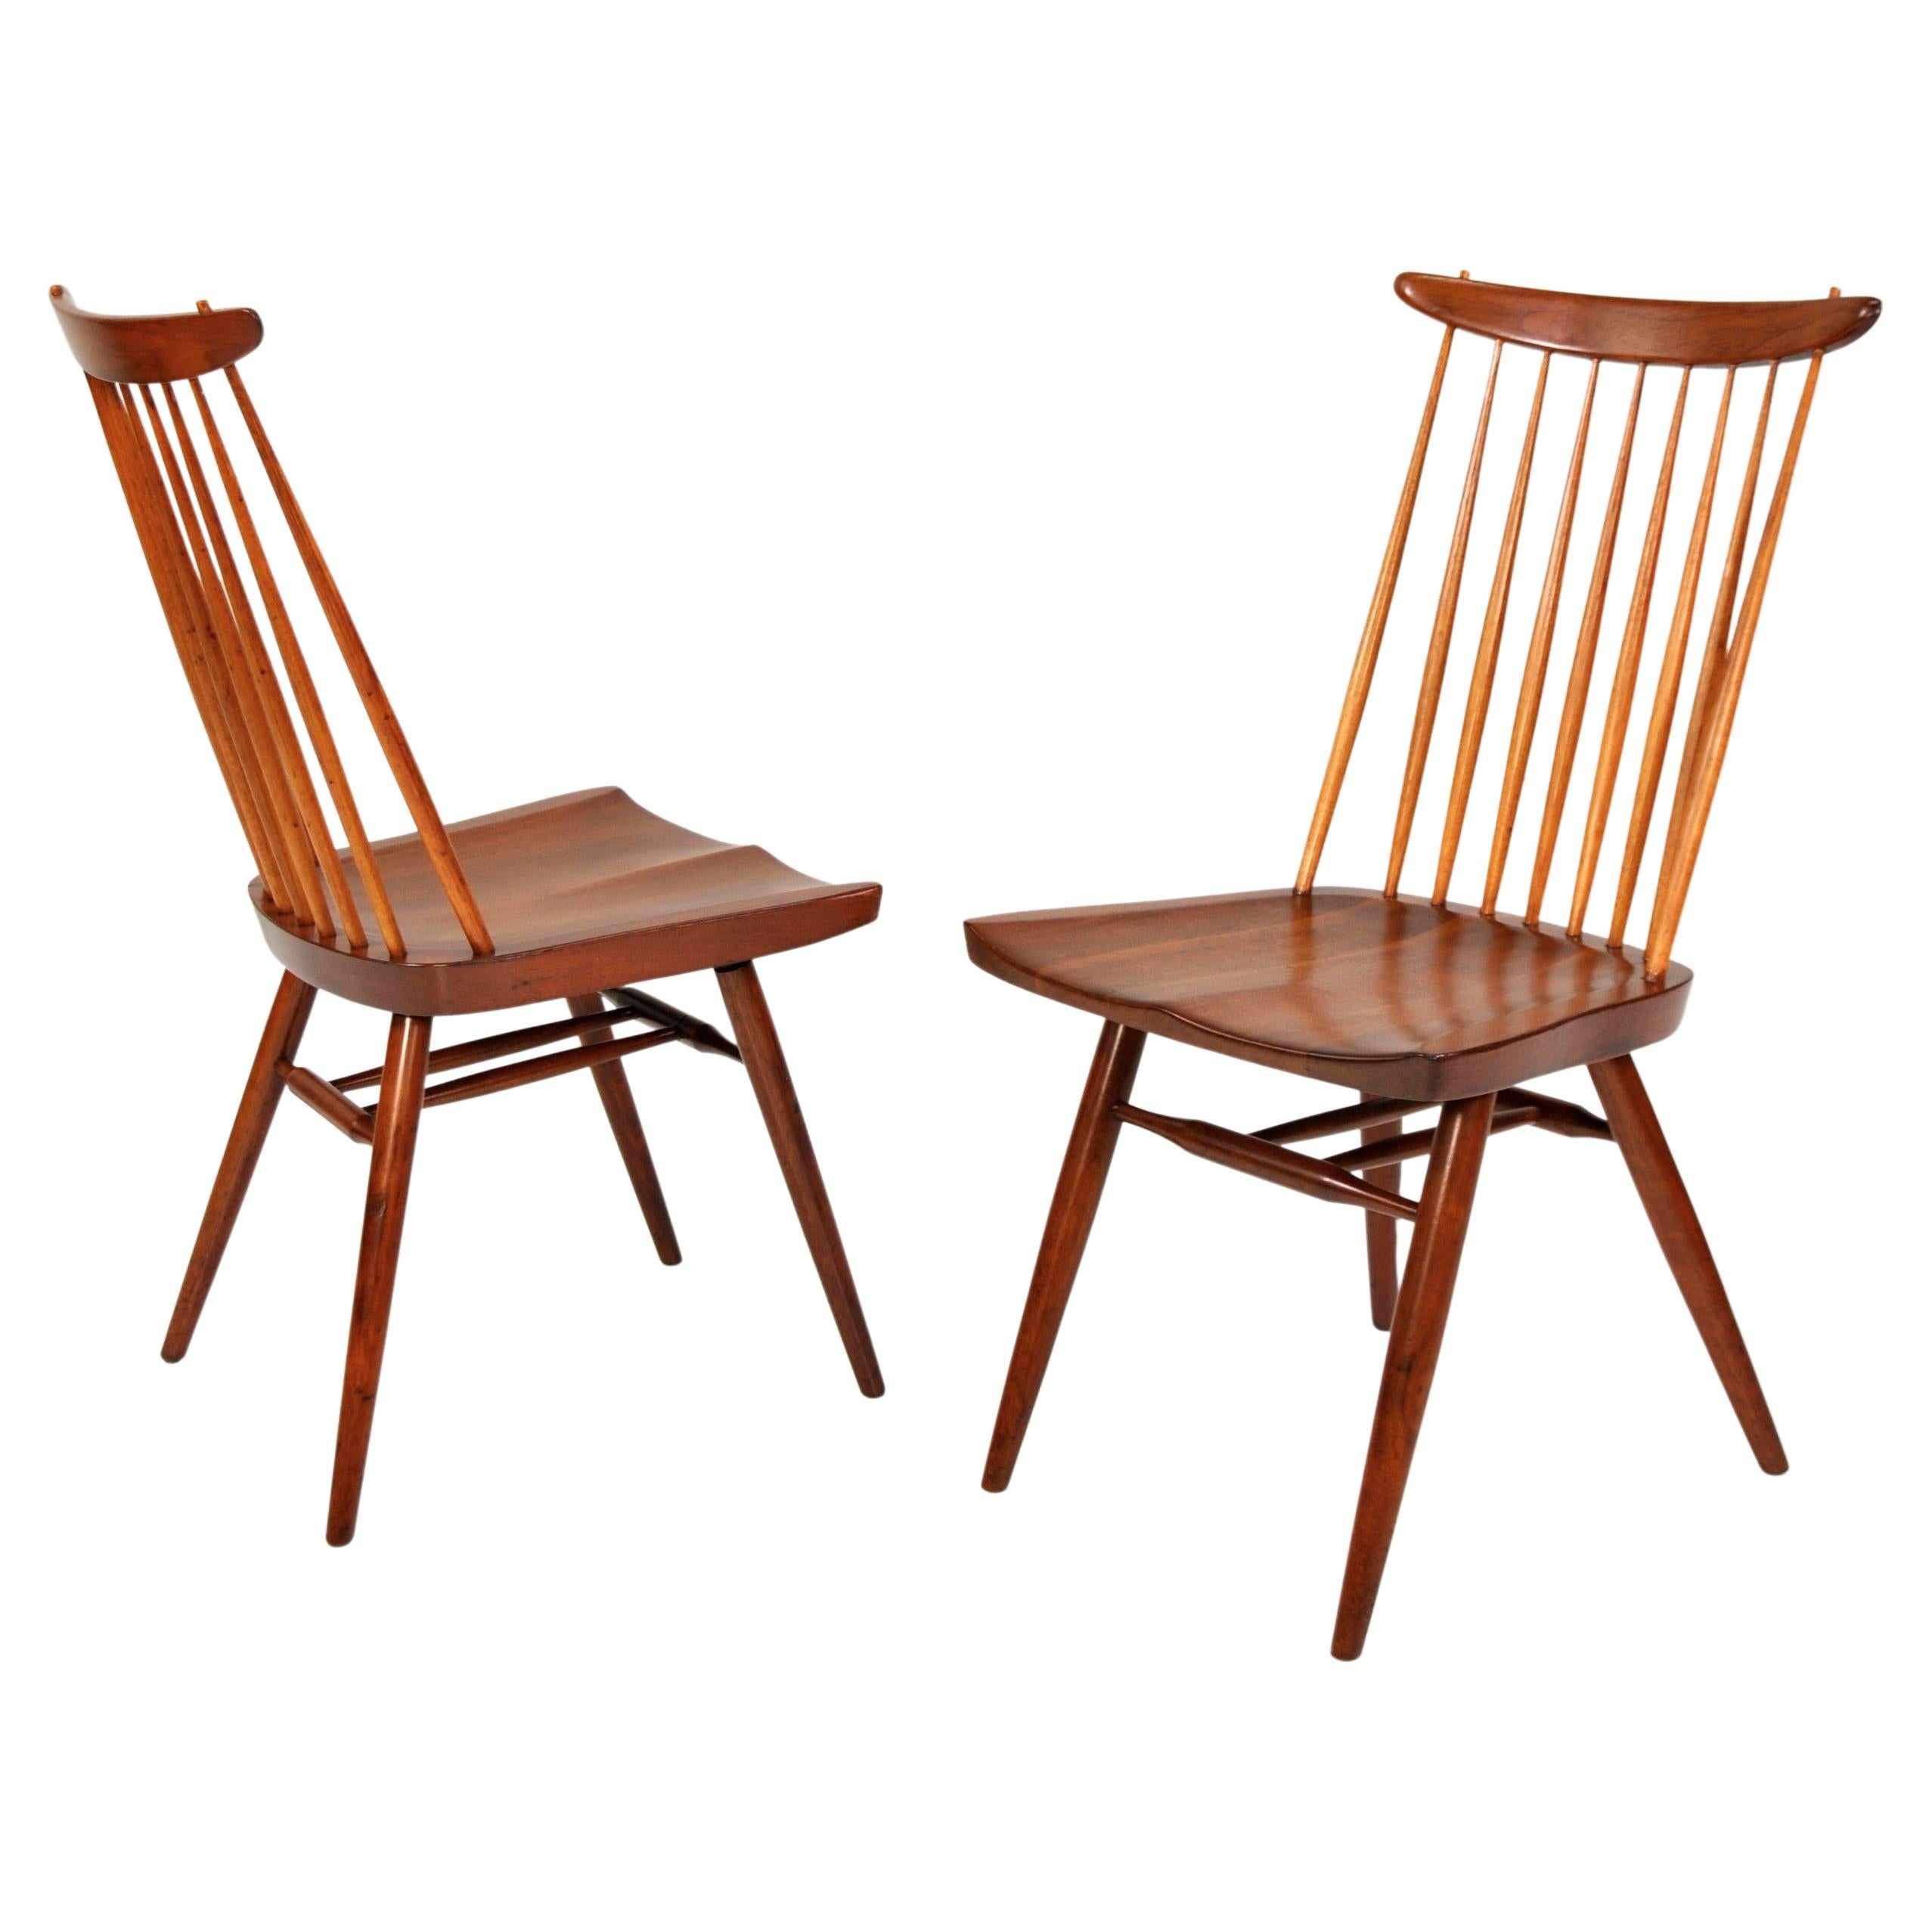 A pair of rare and early model 271 or New Chairs, the iconic Windsor spindle back chairs reimagined by Japanese-American Master Woodworker, George Nakashima in 1956. East Indian Laurel wood in the original Sundra finish with hickory spindles.